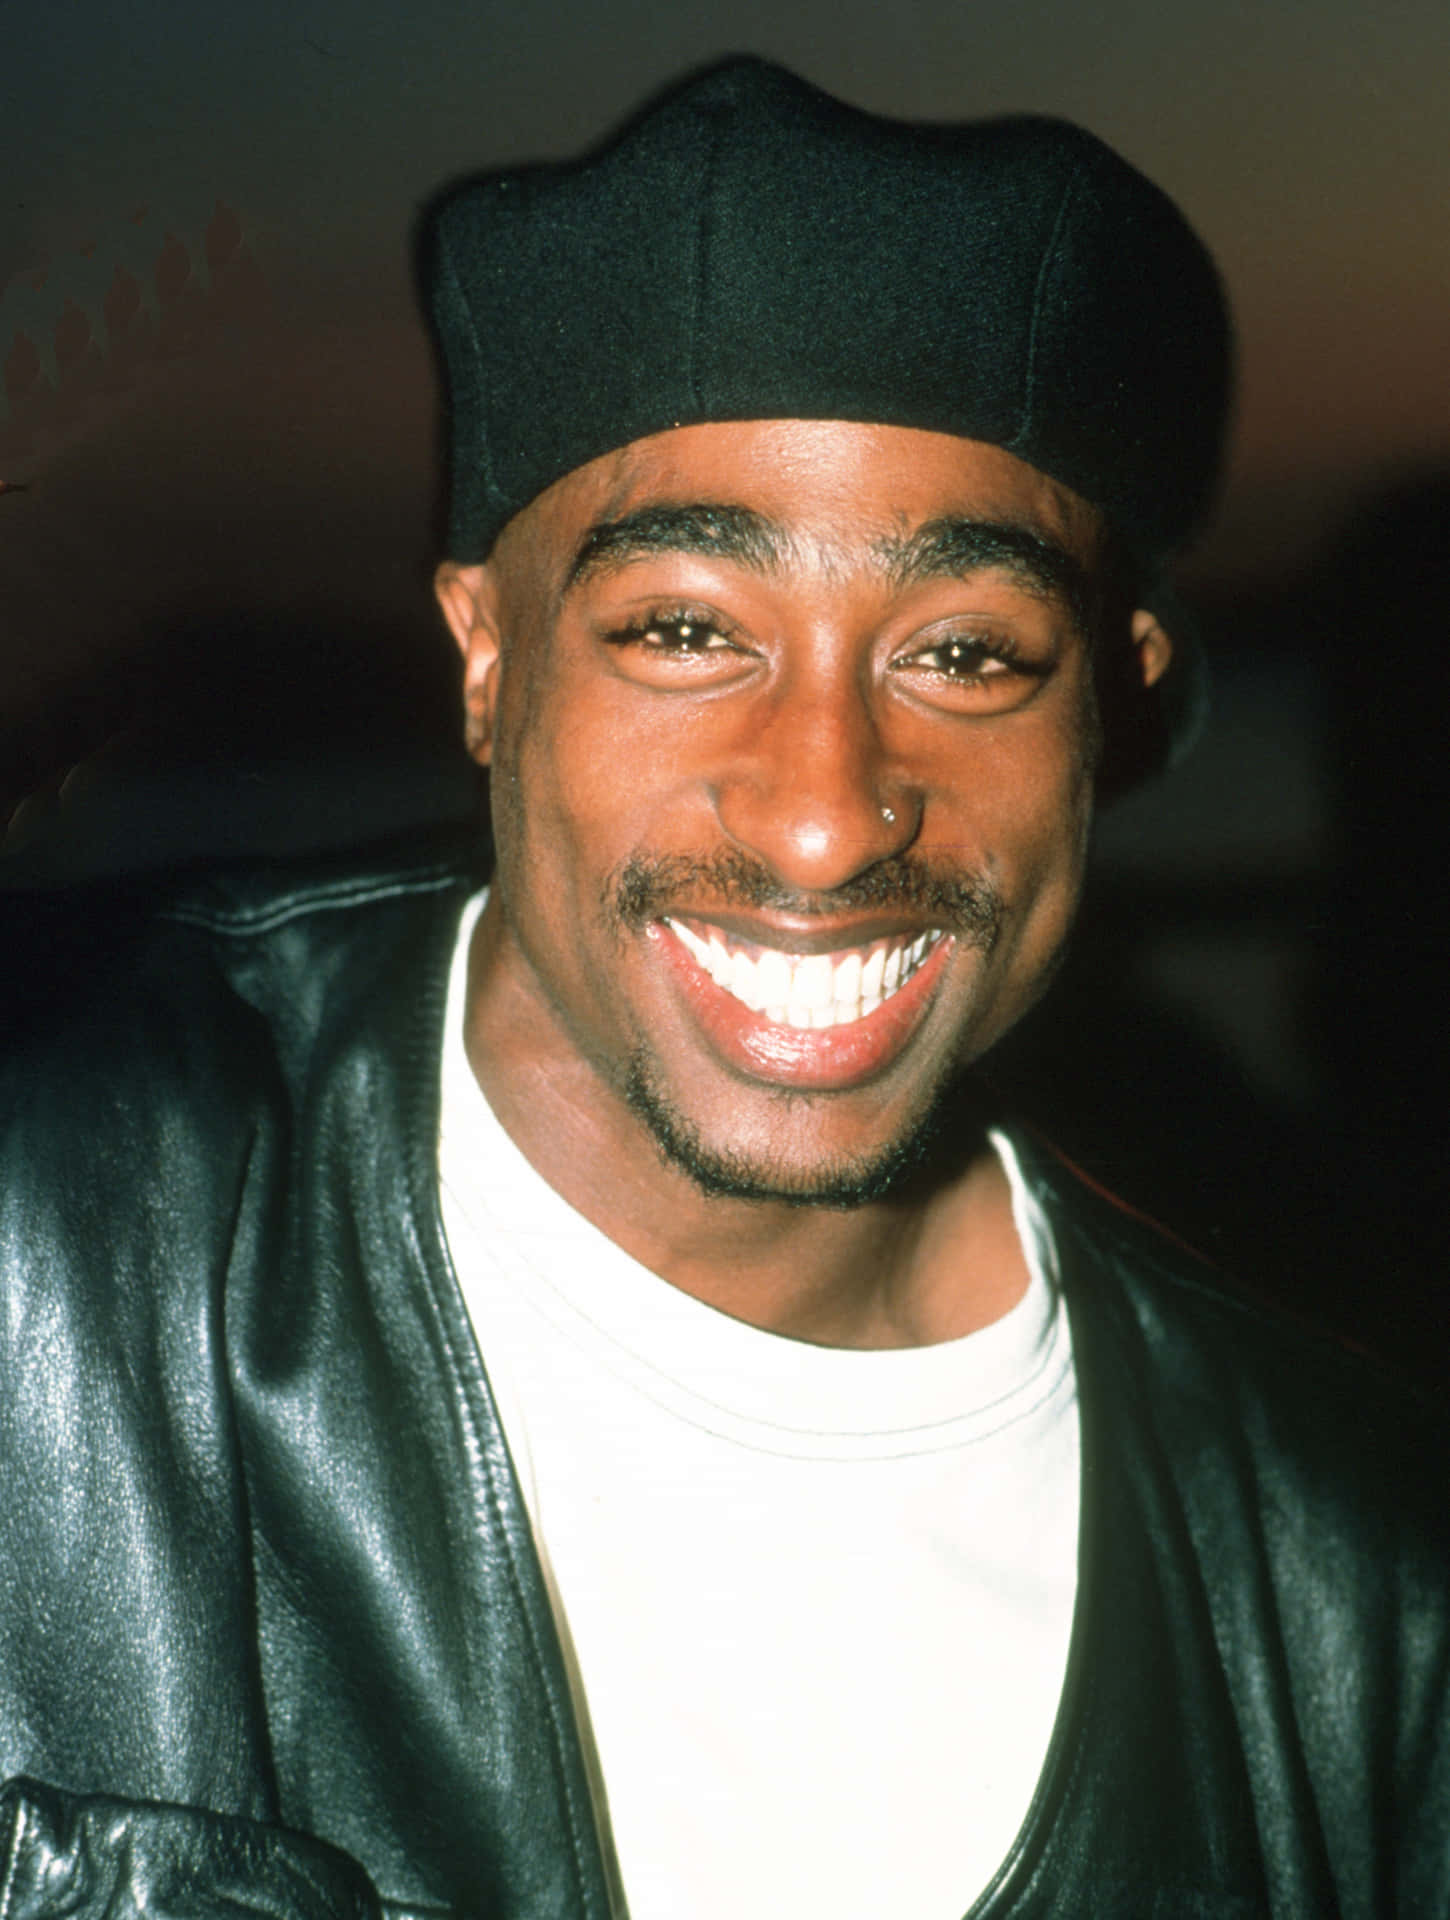 The legacy of Tupac Shakur lives on.